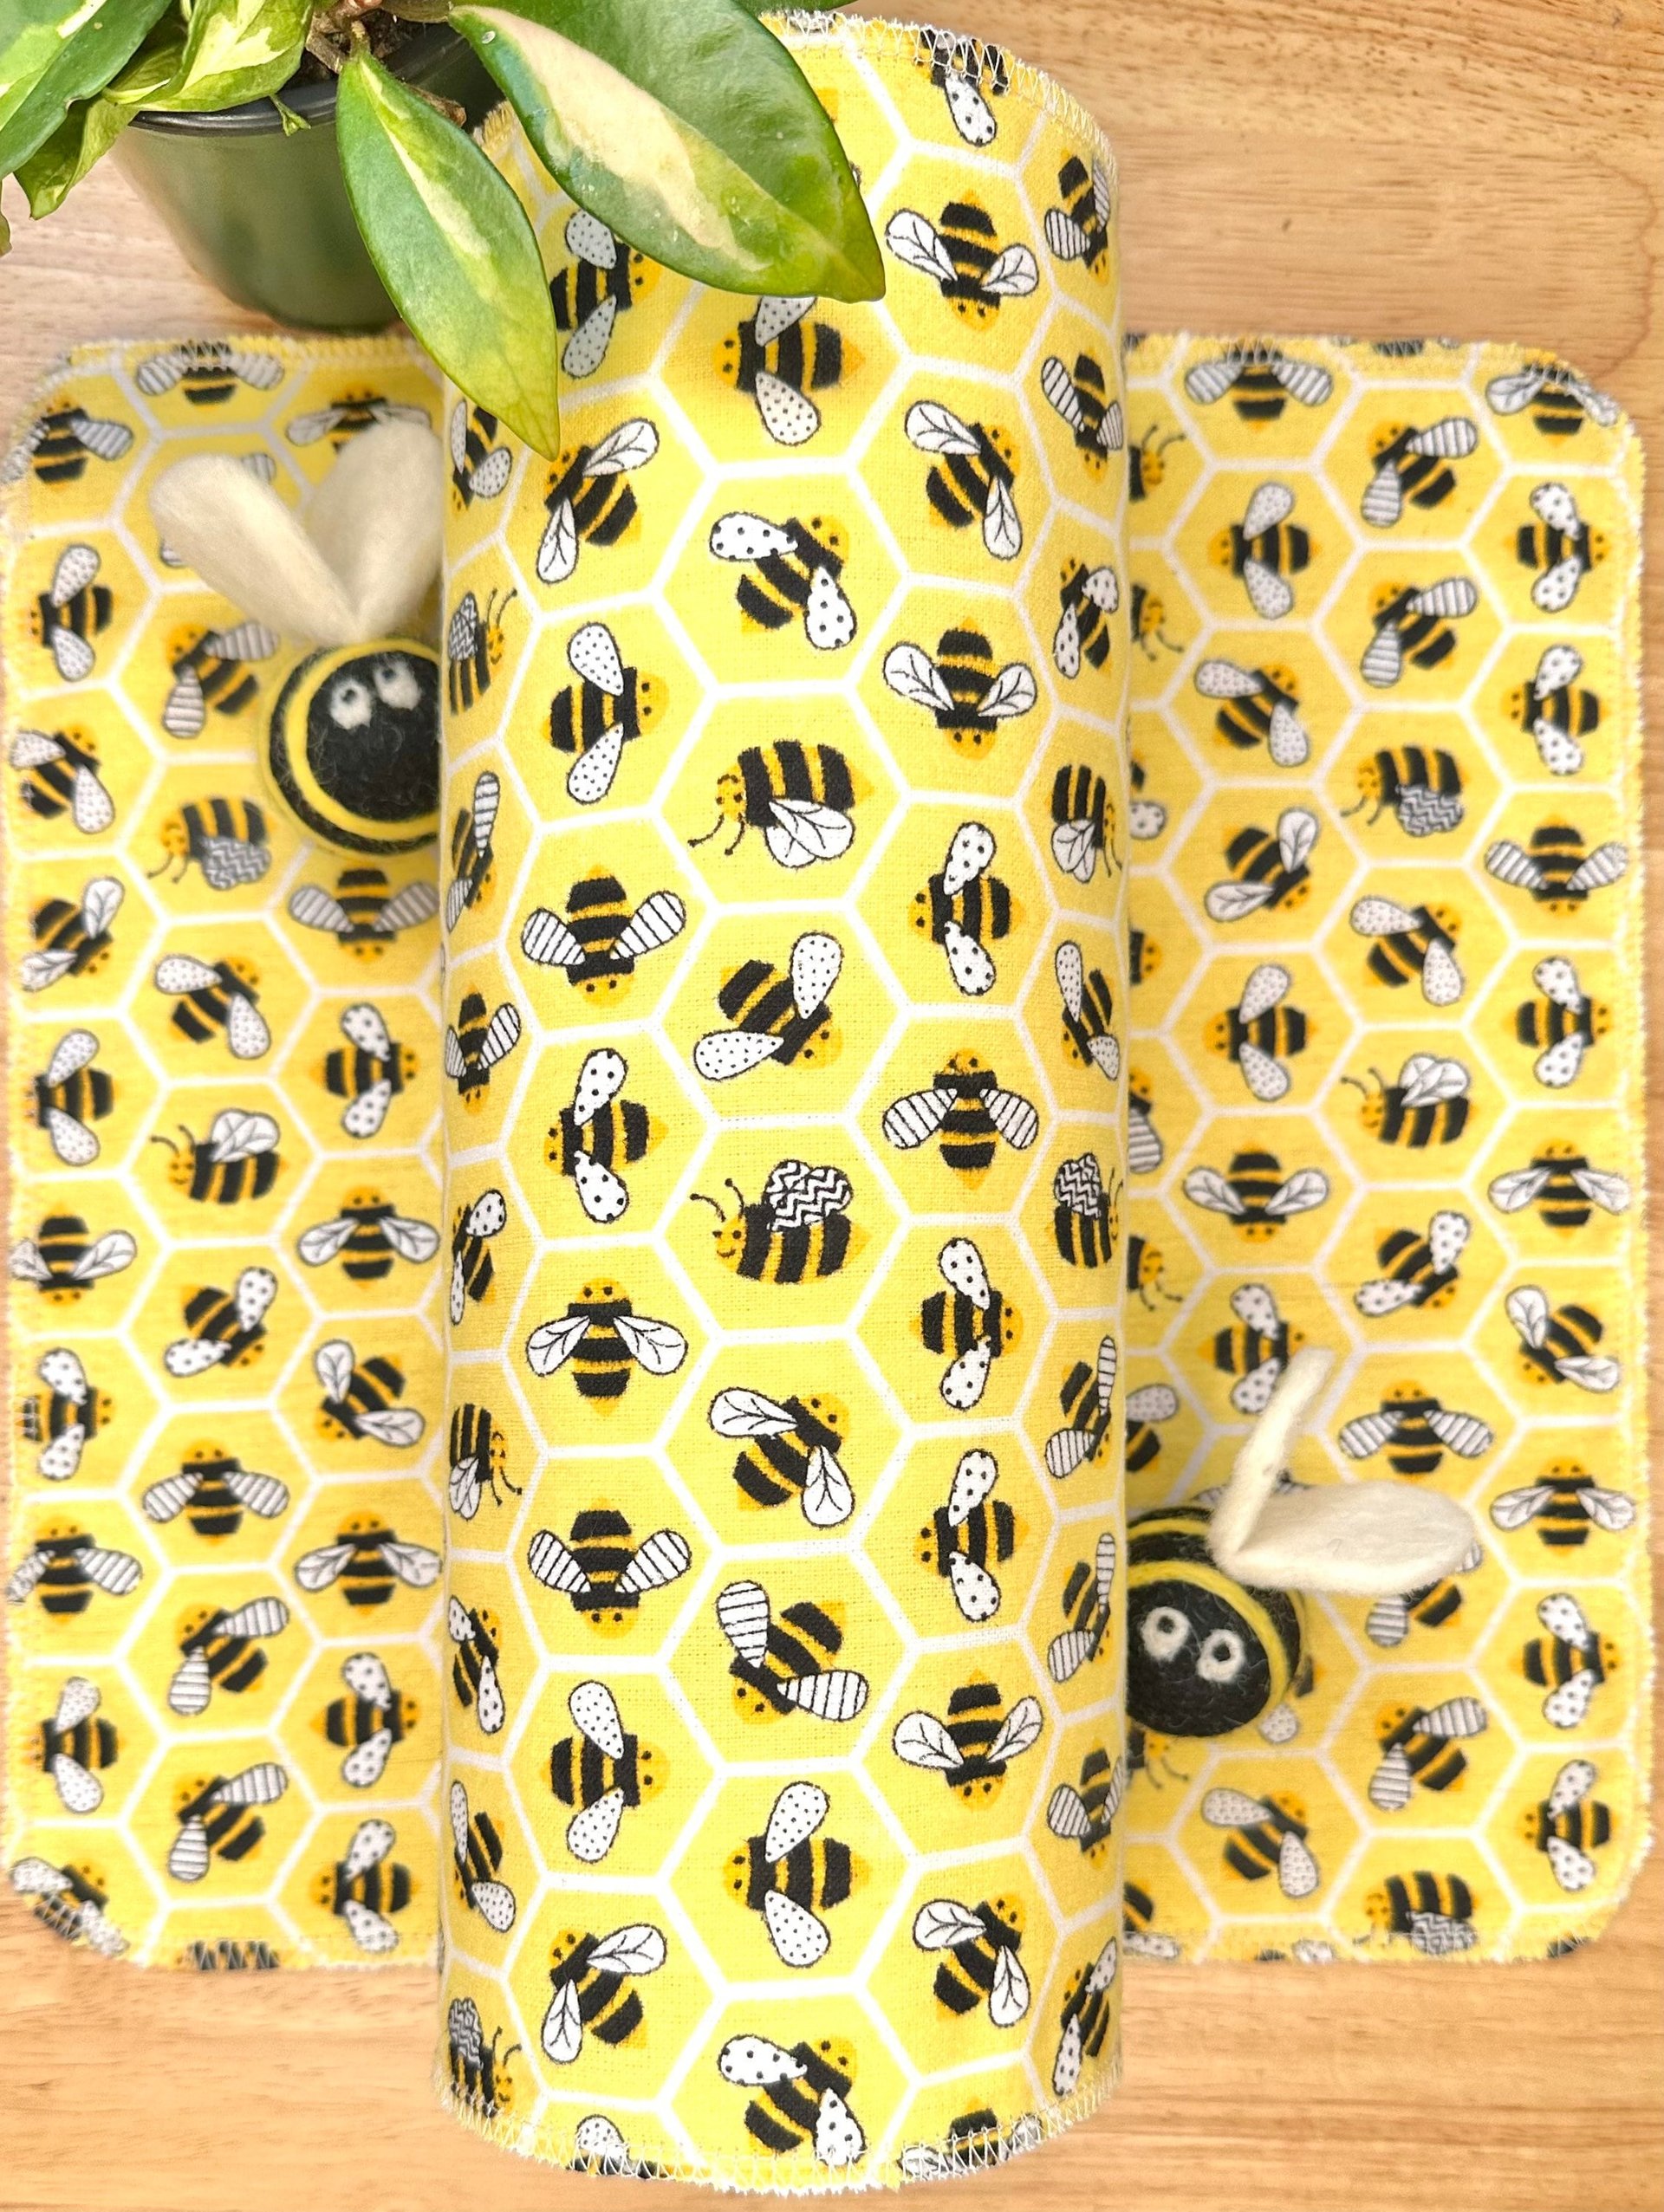 Bee’s On Honeycomb Paperless Towels || 12 Unpaper Towels w/Bee print || Washable Bee Baby Wipes || Bee Towelettes